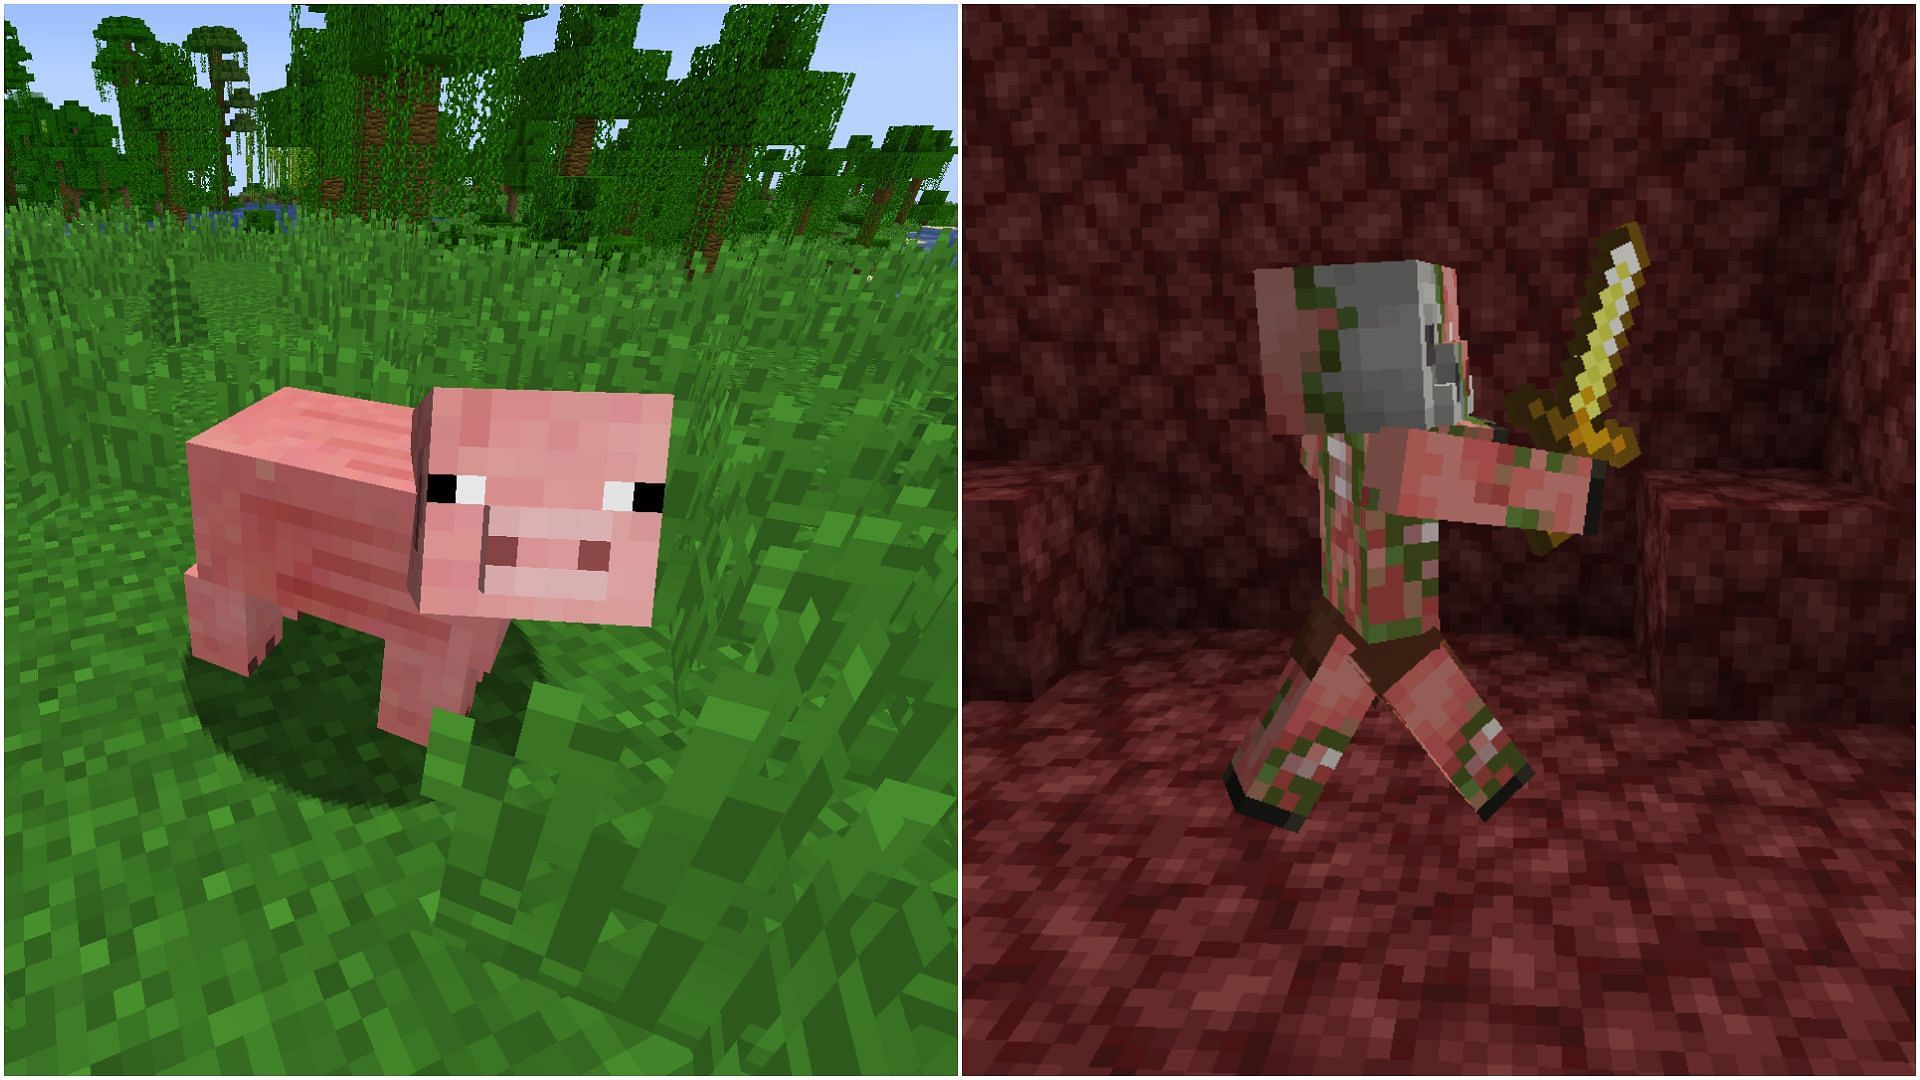 Pigs turn into Zombified Piglins when struck by lightning in Minecraft (Image via Mojang)